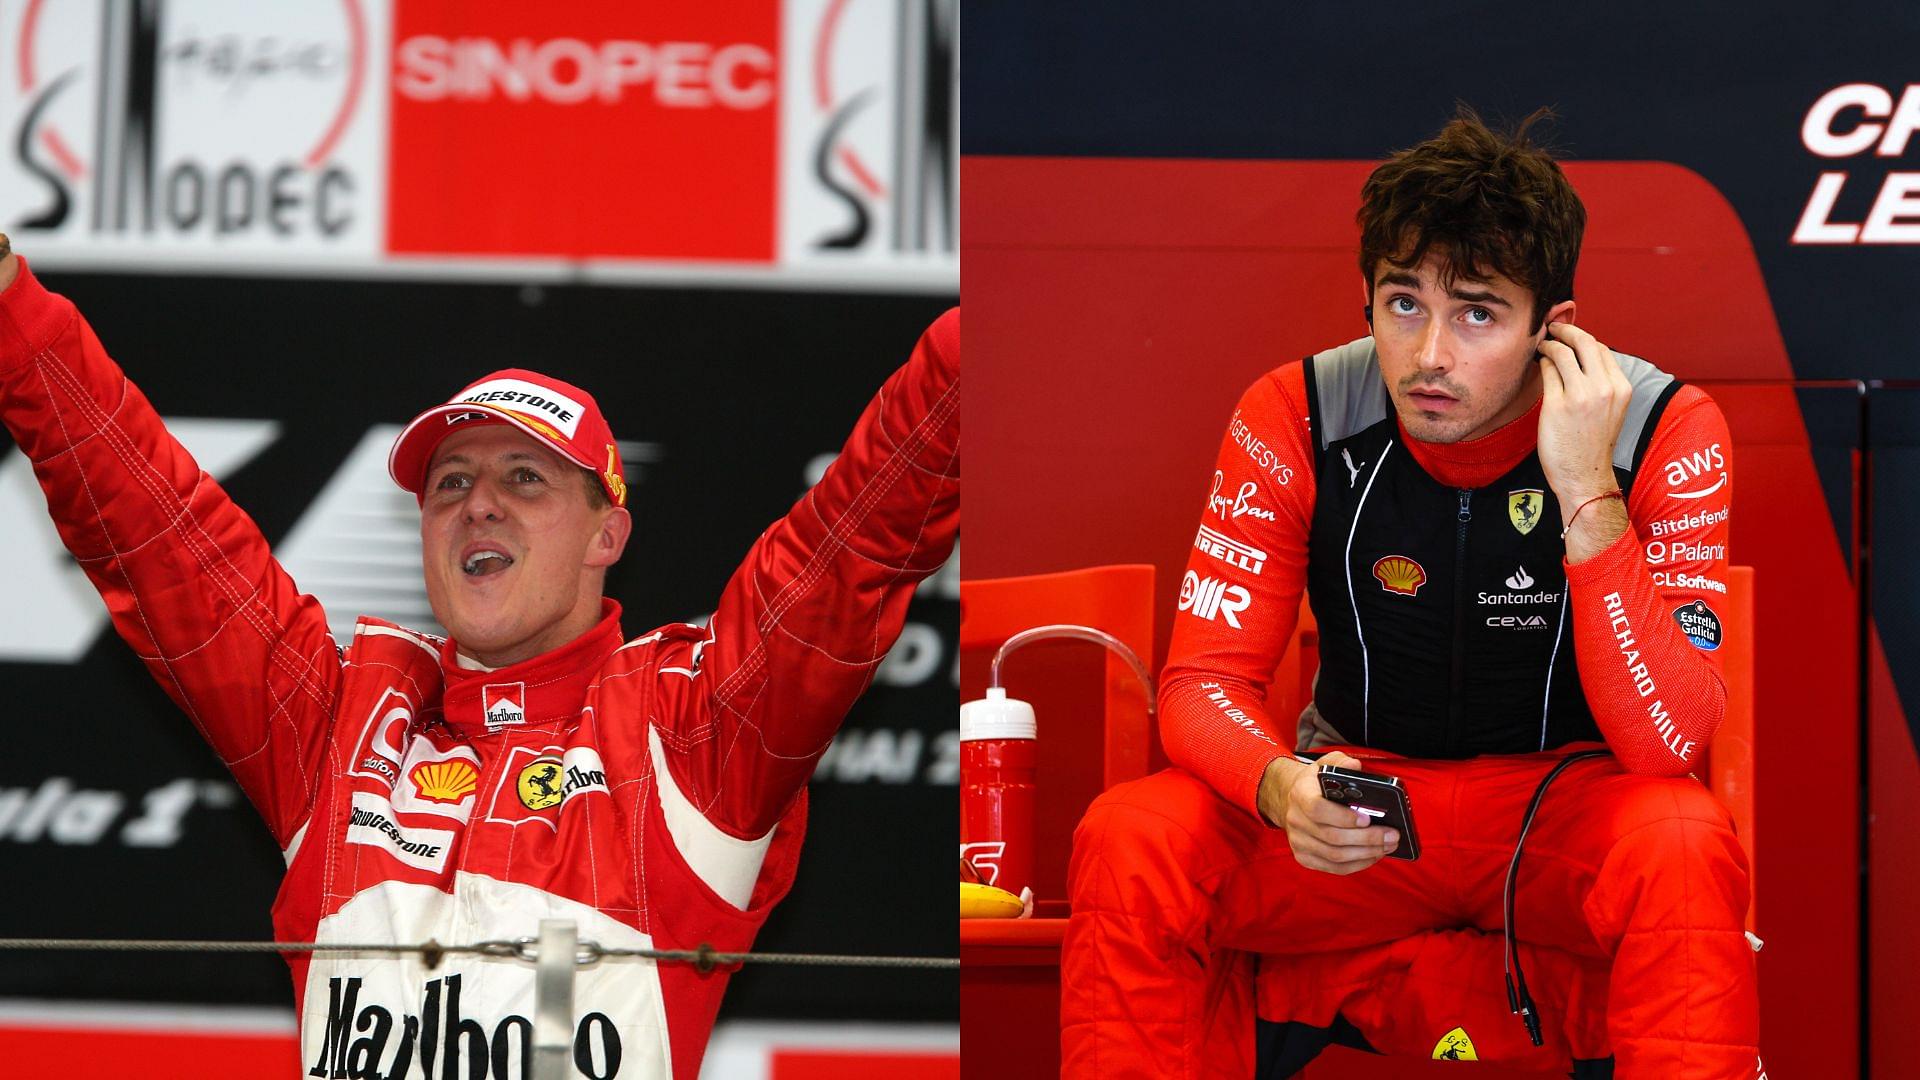 Ferrari Hero Charles Leclerc Has One Major Superpower- But How Close Is He to the Legendary Michael Schumacher?